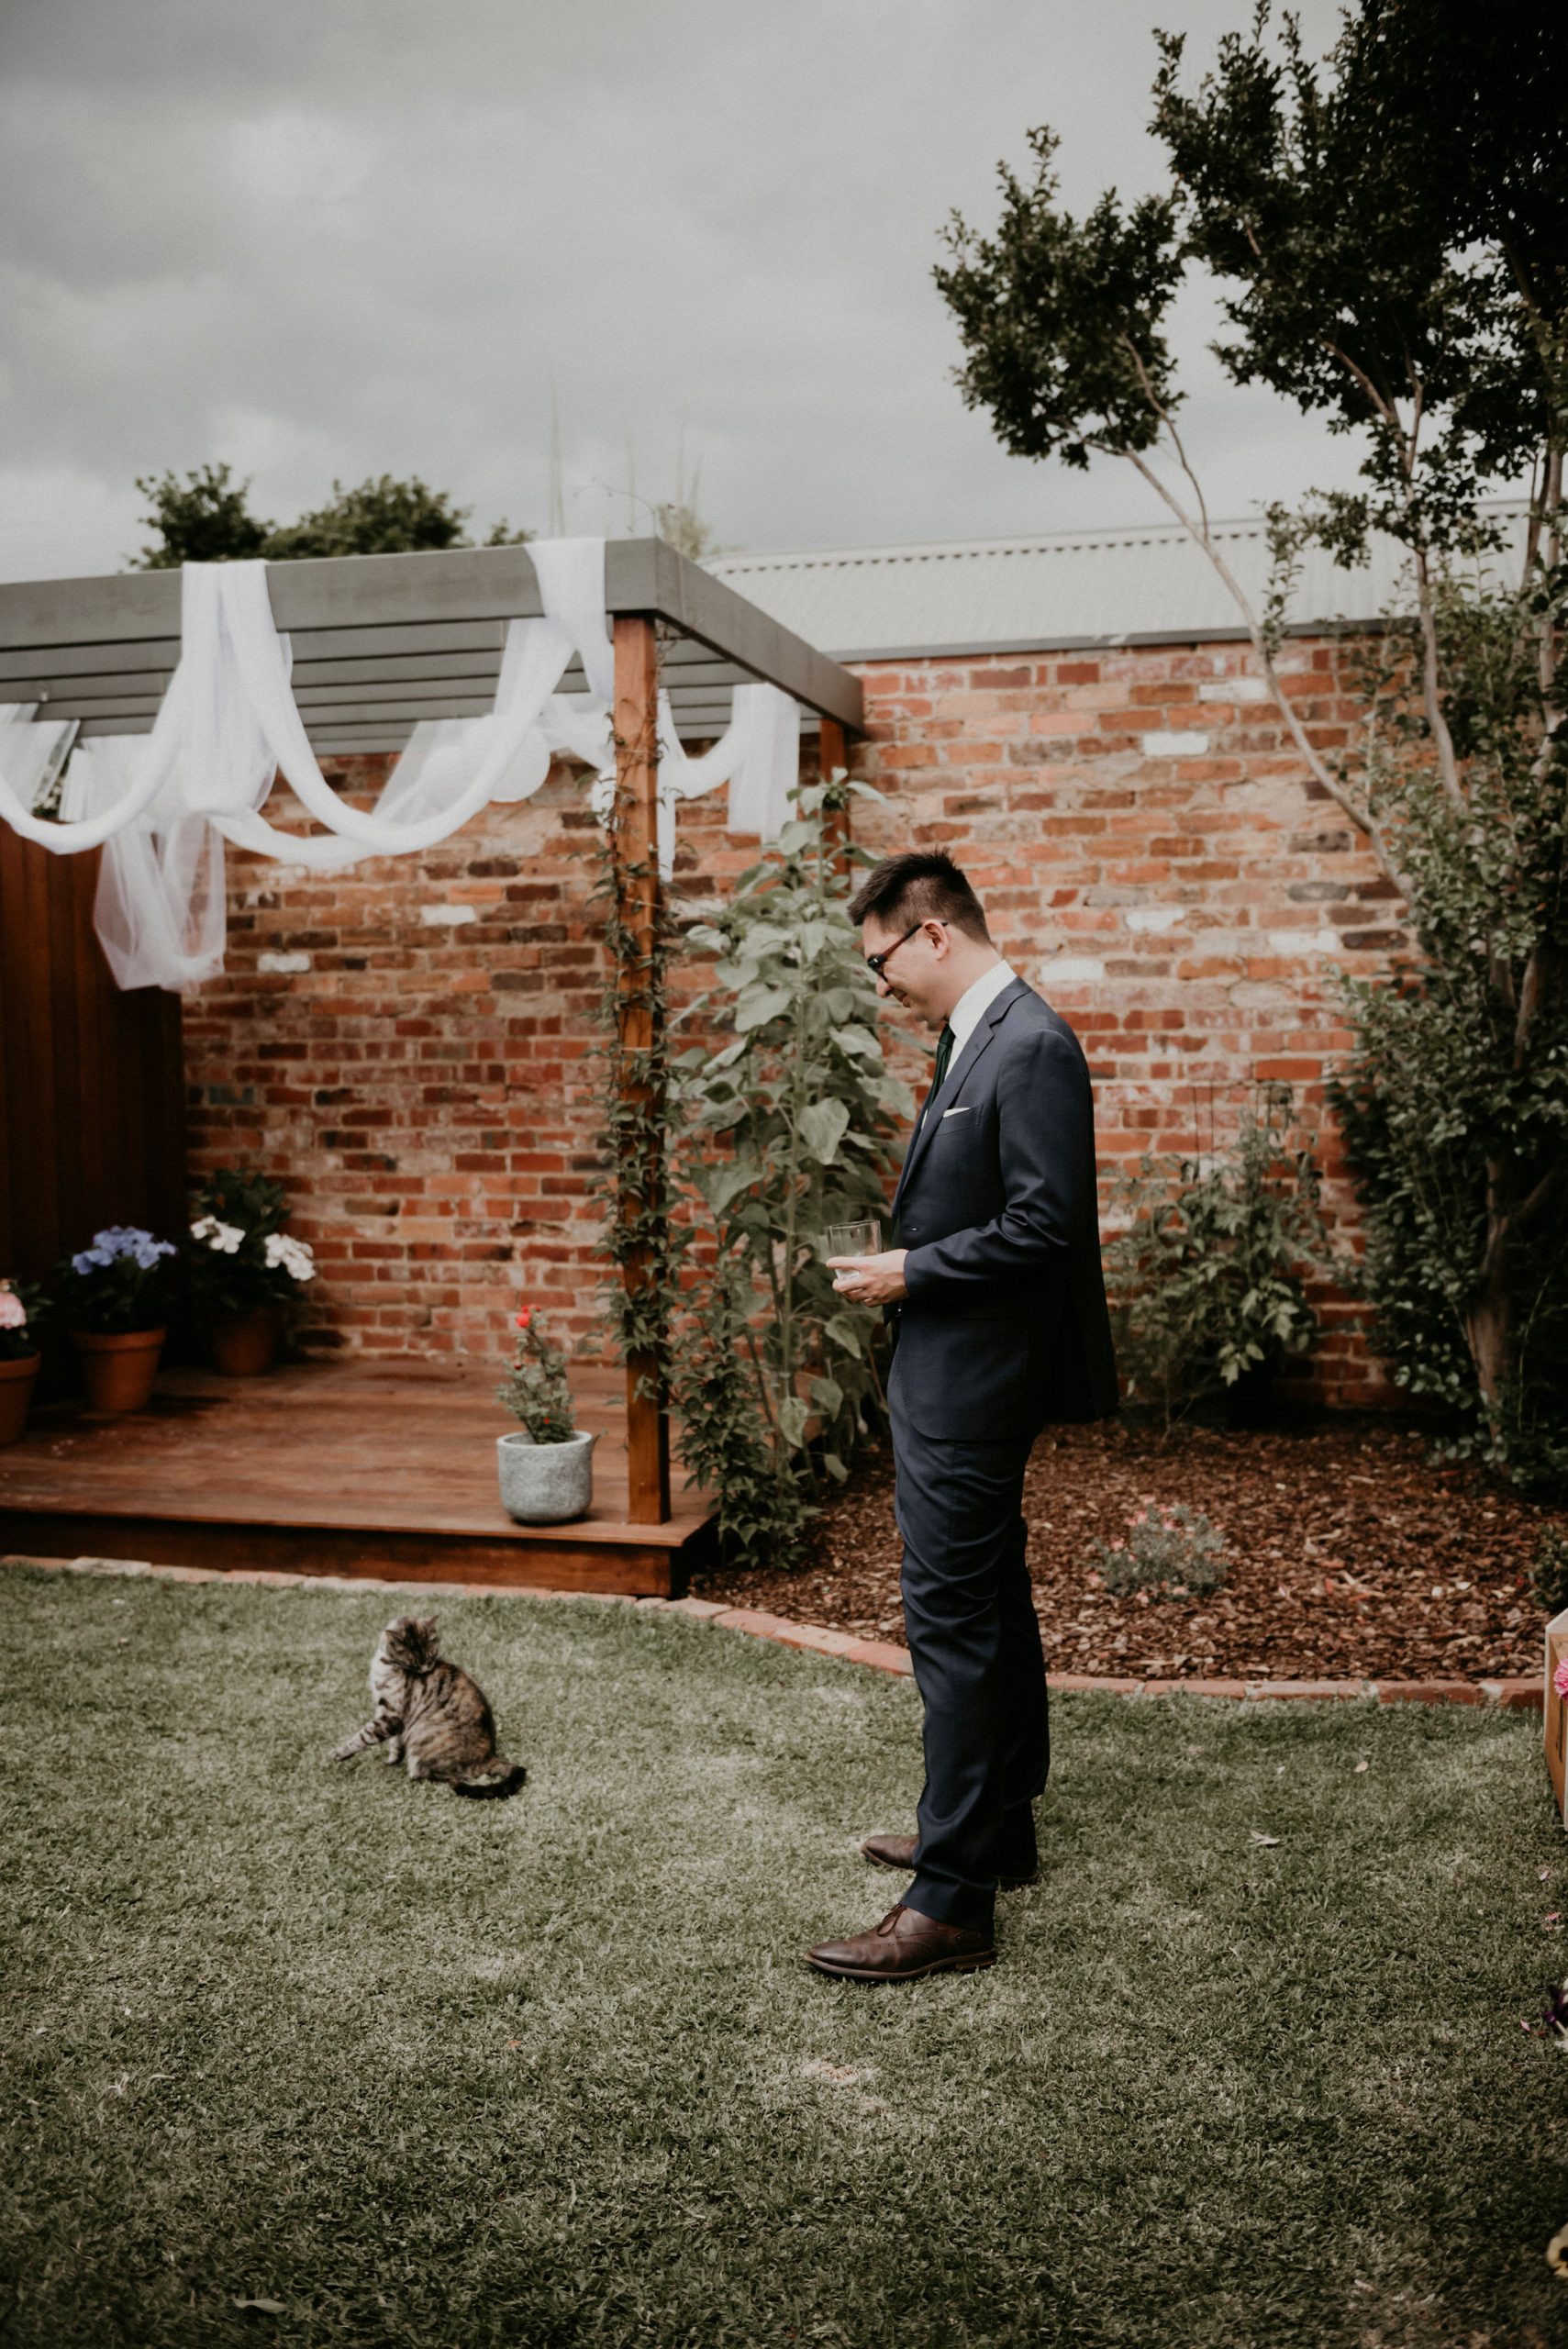 Lets-Elope-Melbourne-Celebrant-Photographer-Elopement-Package-Victoria-Sarah-Matler-Photography-Elope-at-Home-Footscray-weddings-intimate-17